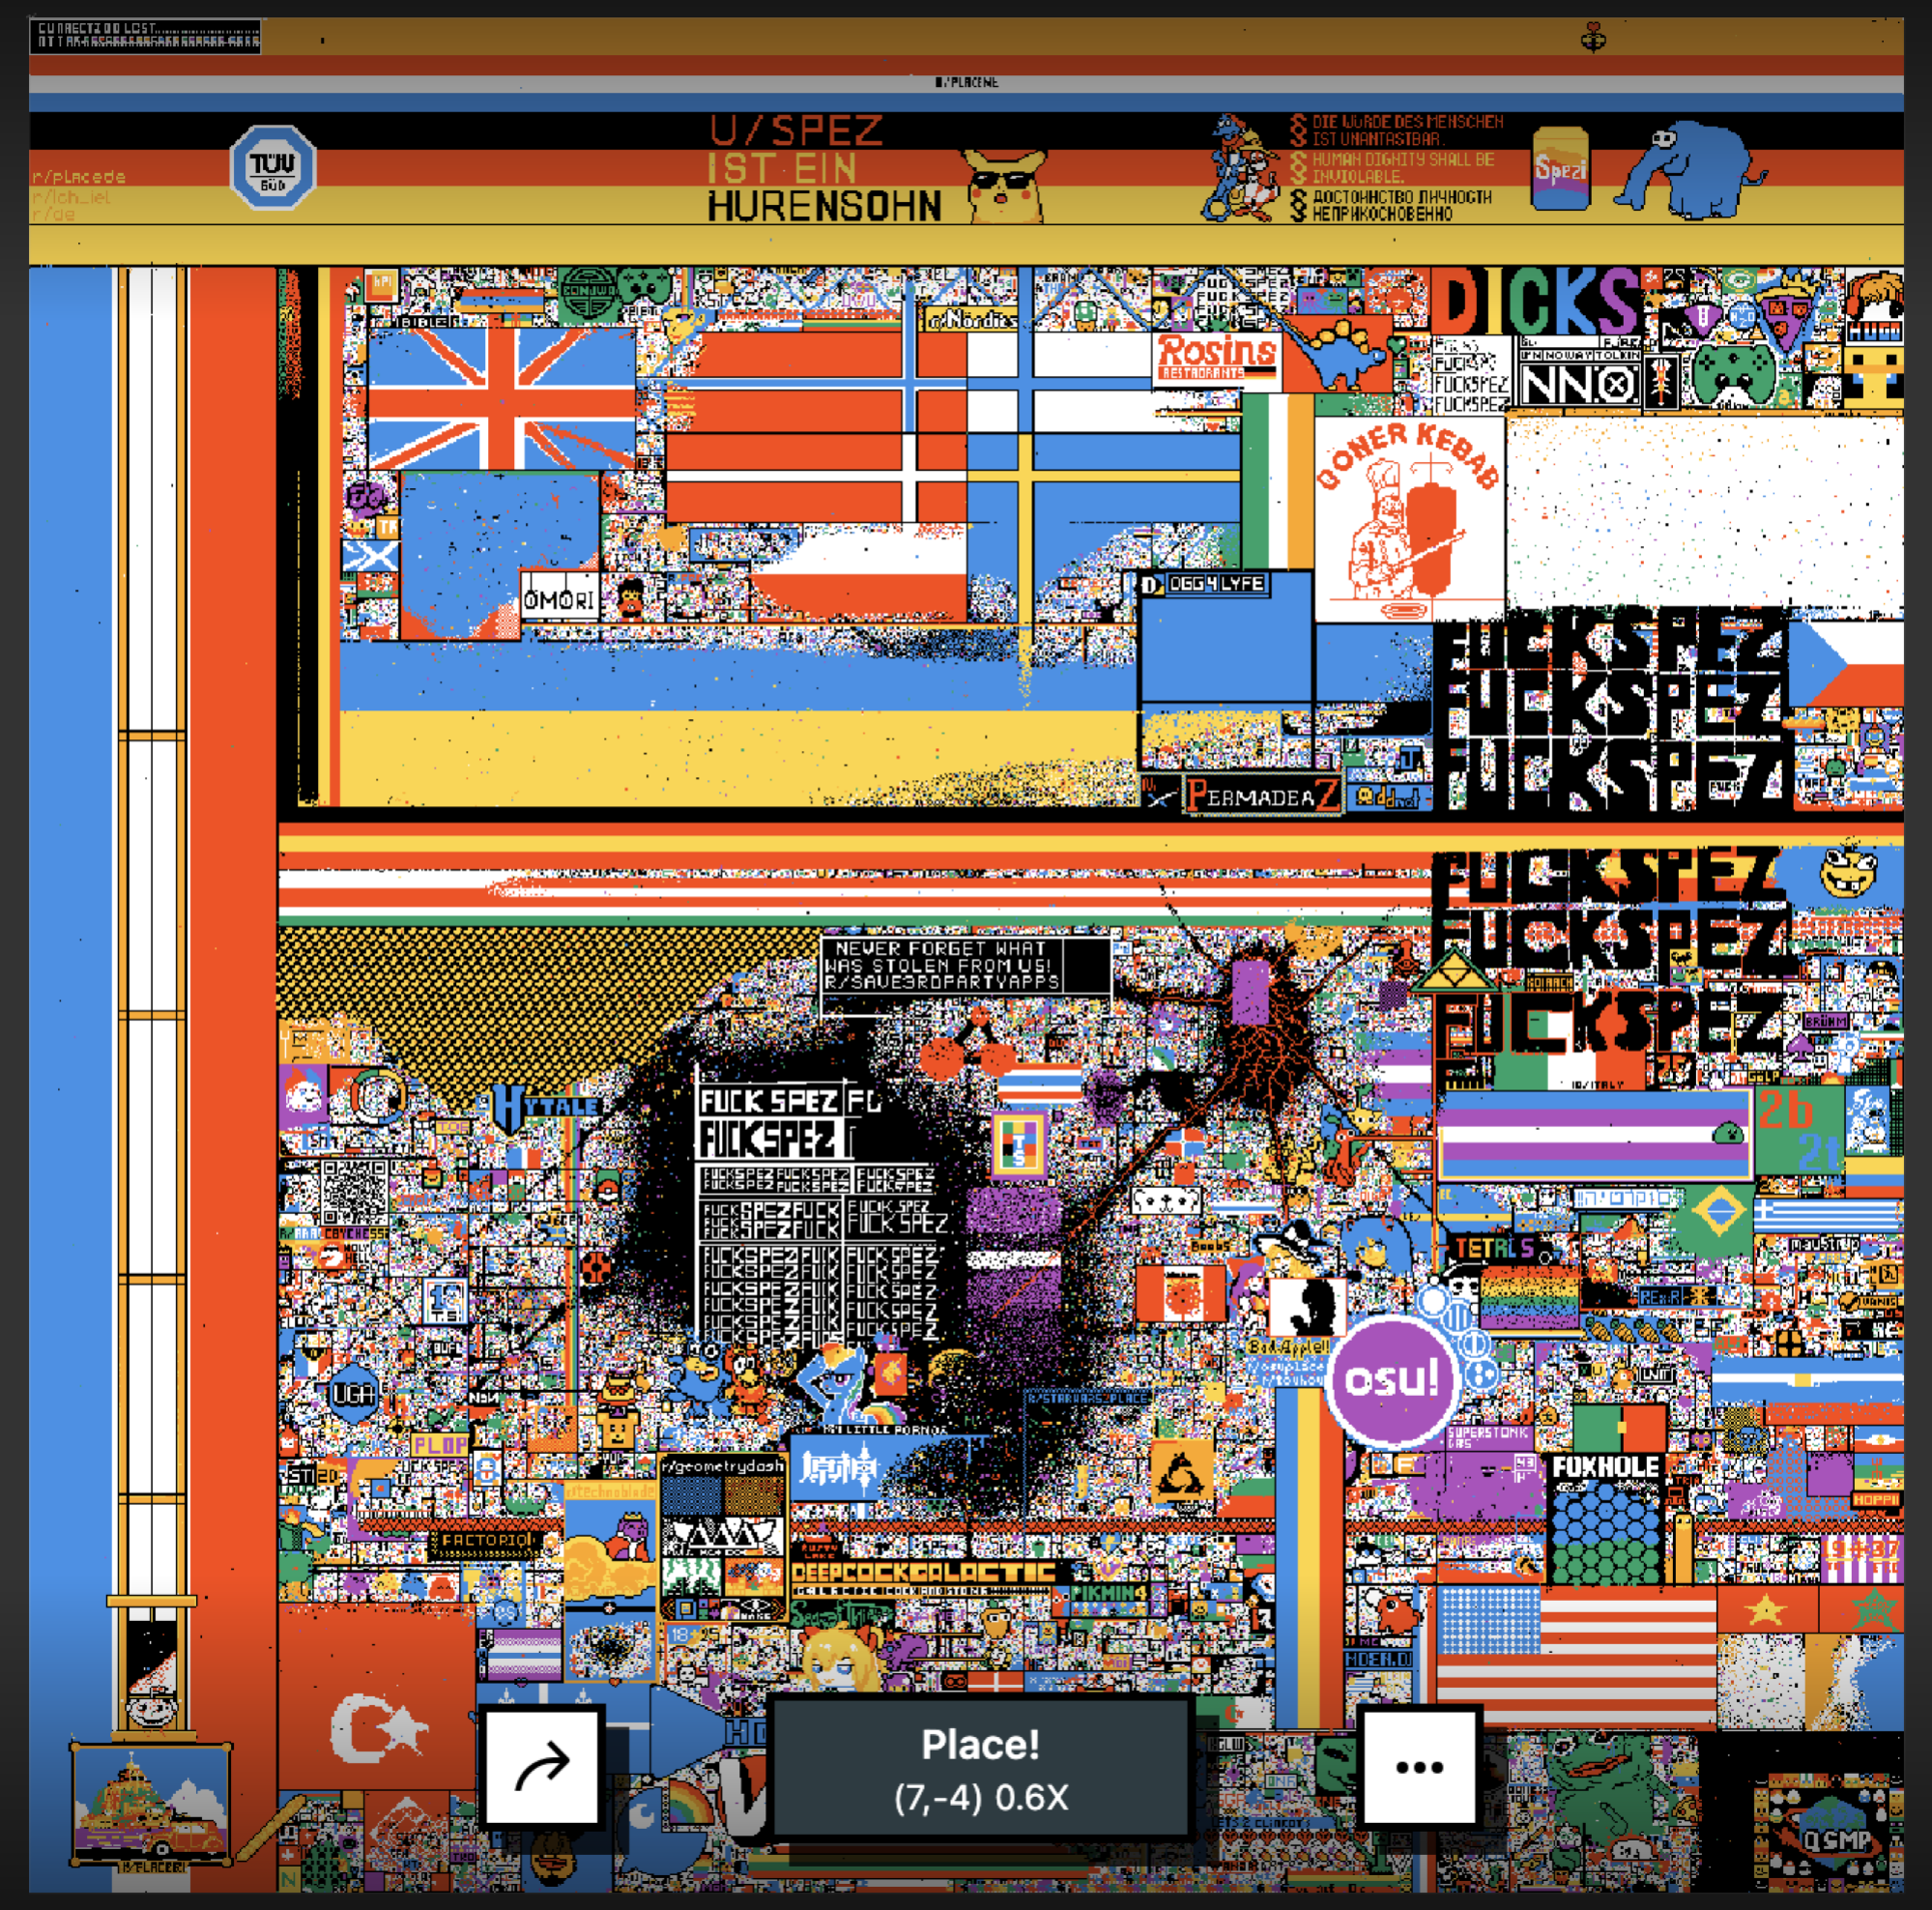 A screenshot of r/place on Reddit.